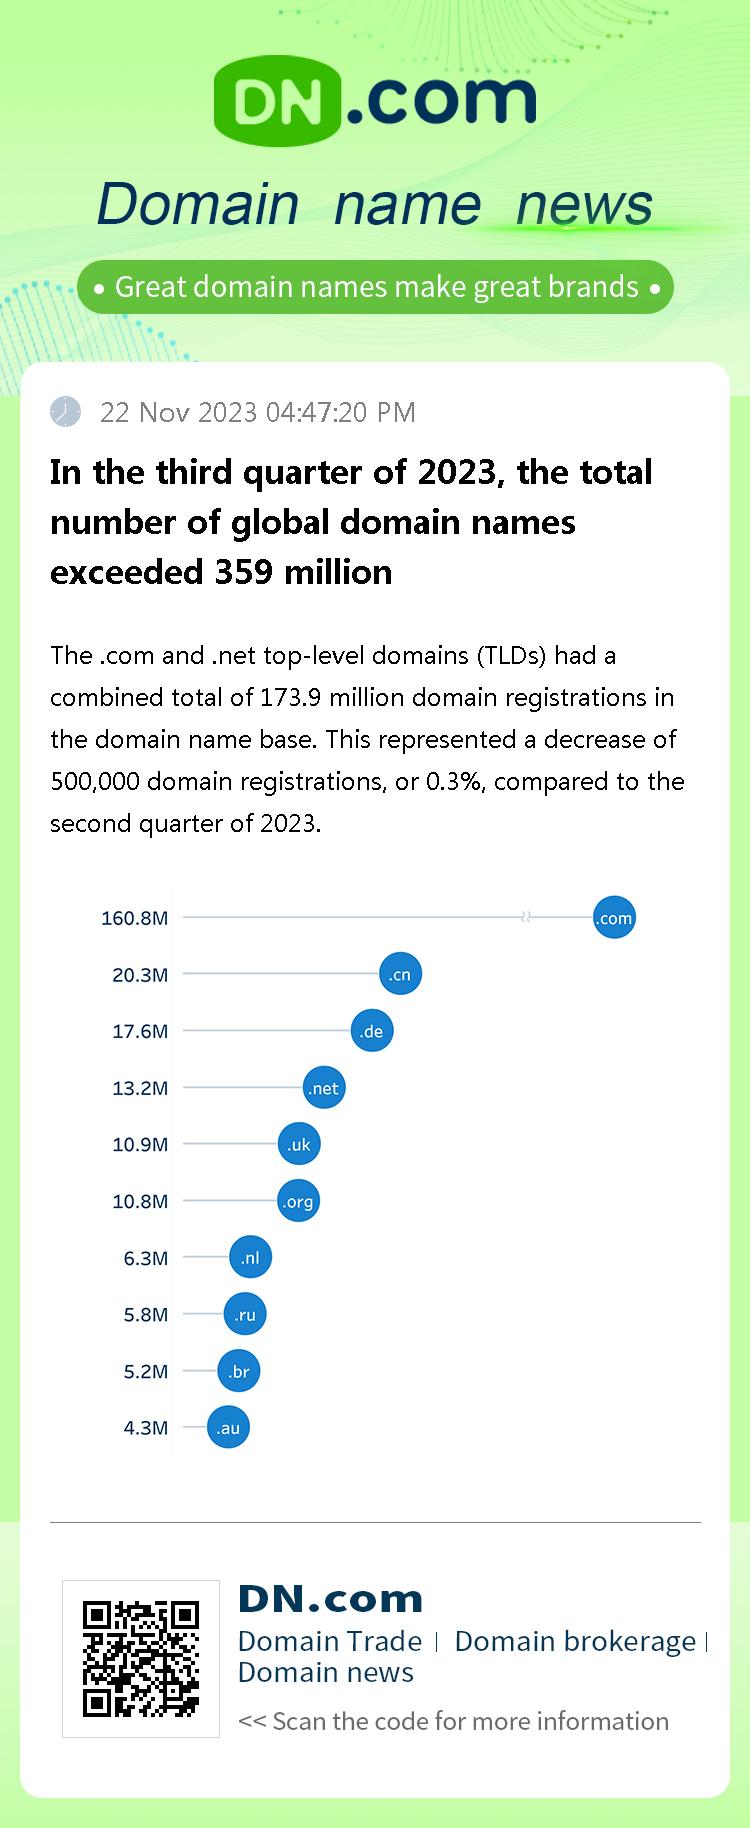 In the third quarter of 2023, the total number of global domain names exceeded 359 million